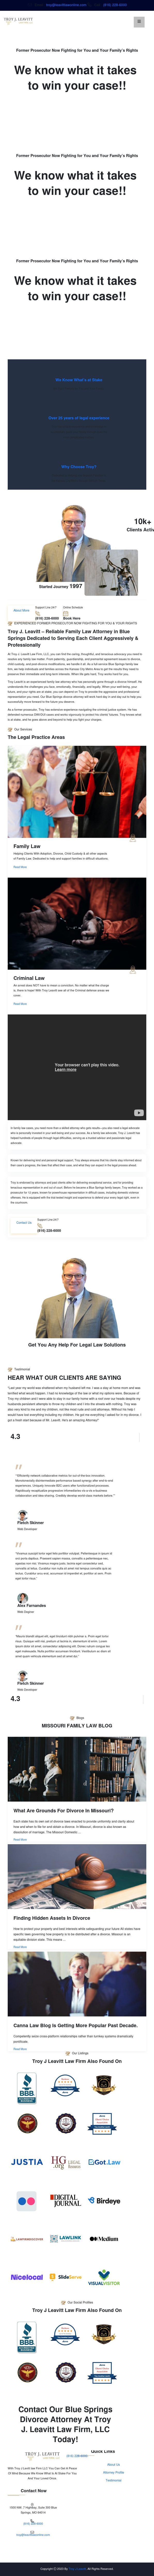 Troy J. Leavitt Law Firm, LLC - Independence MO Lawyers